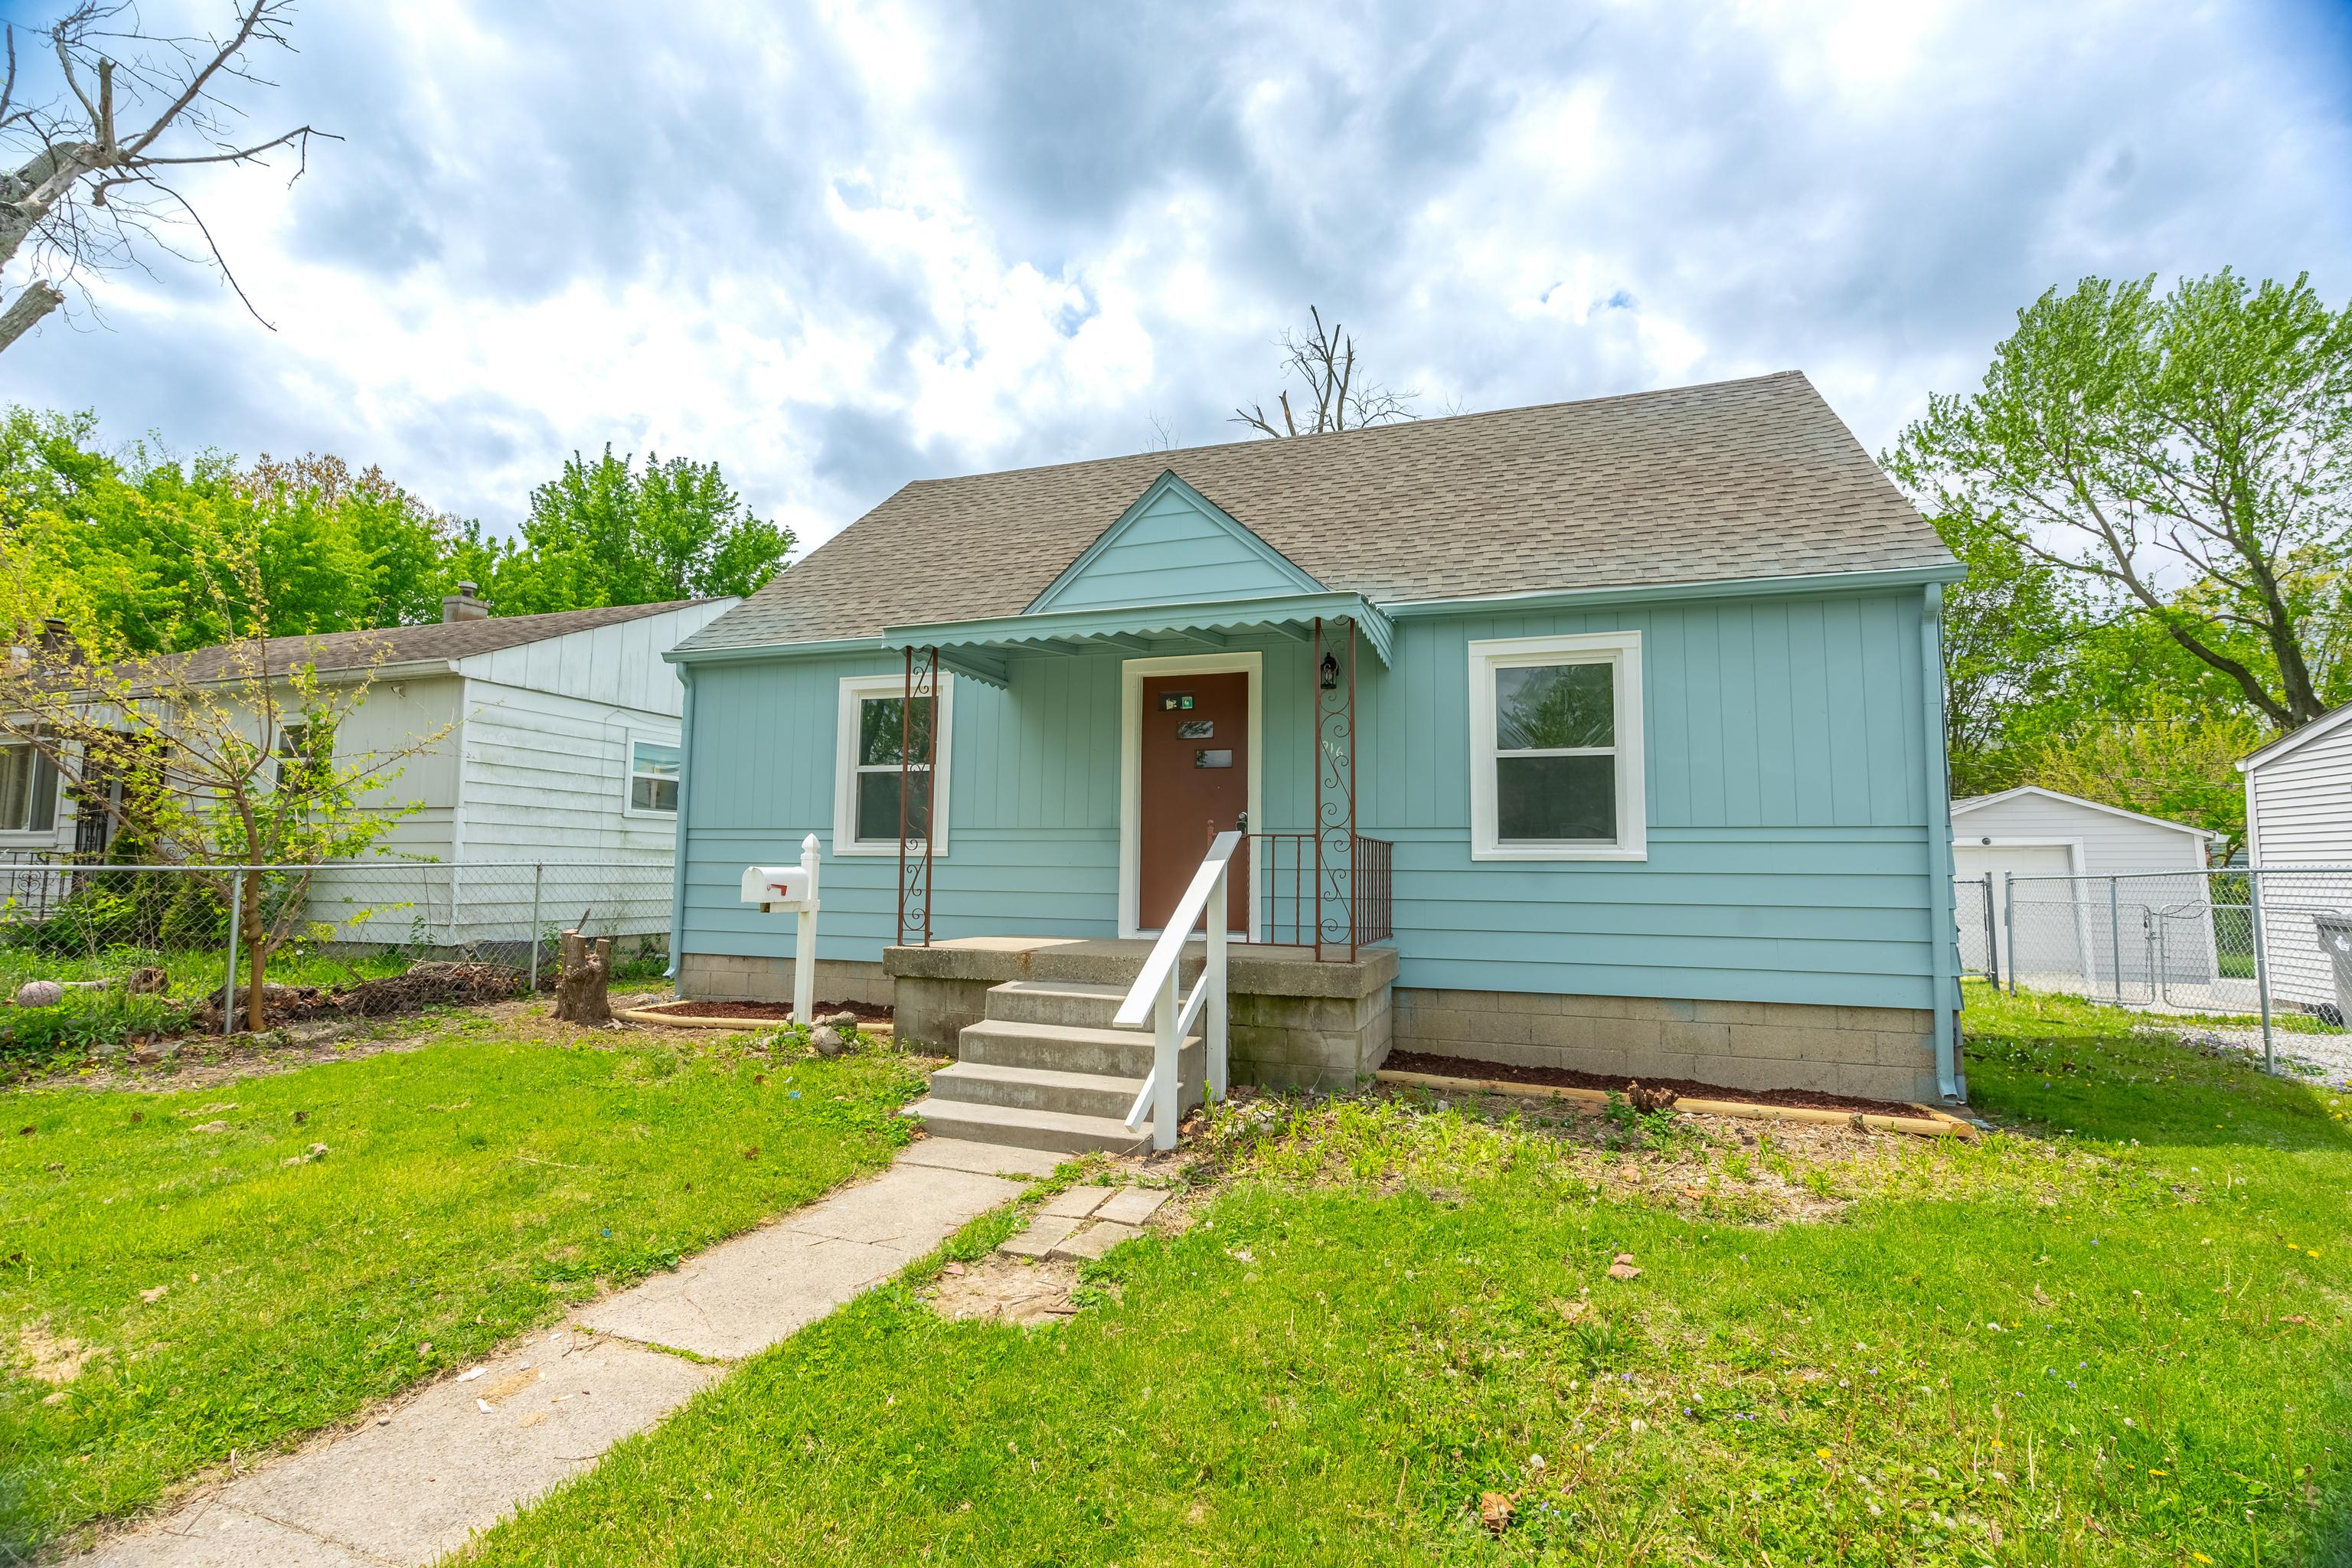 Photo one of 1916 N Riley Ave Indianapolis IN 46218 | MLS 21975606